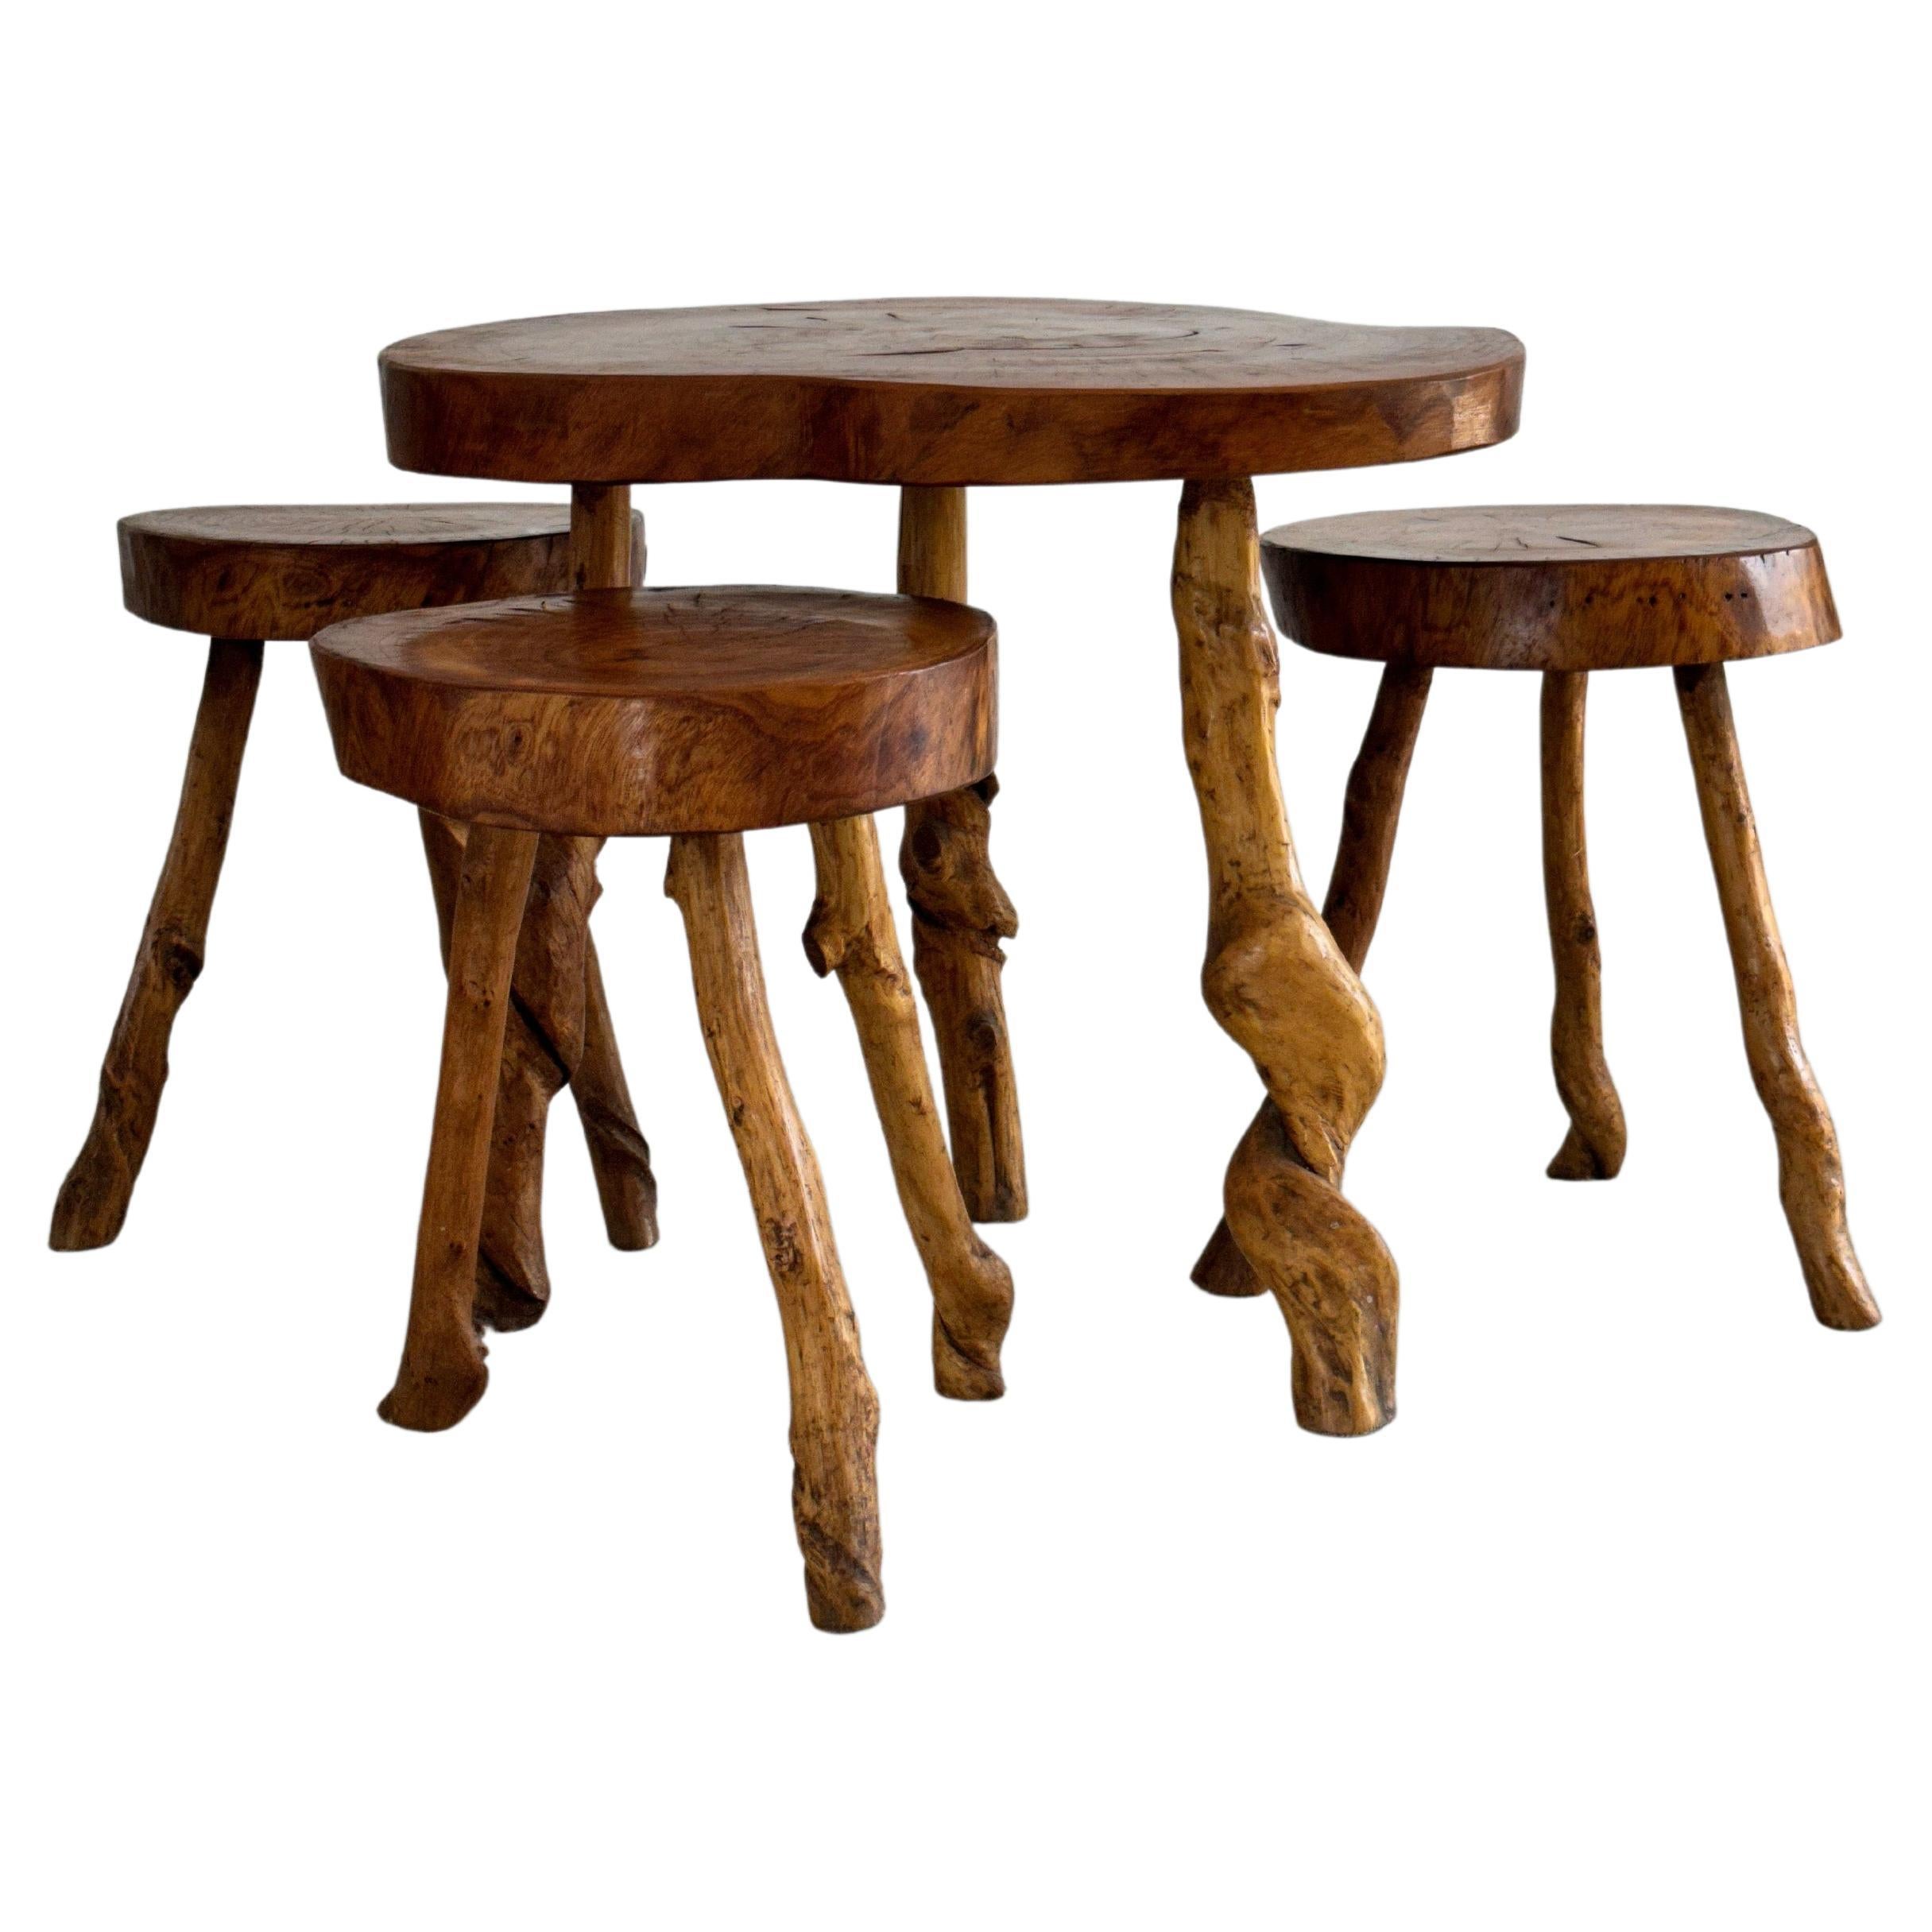 Brutalist Set of 3 Low Stools and 1 Coffee Table, Solid Wood, France, 1960s